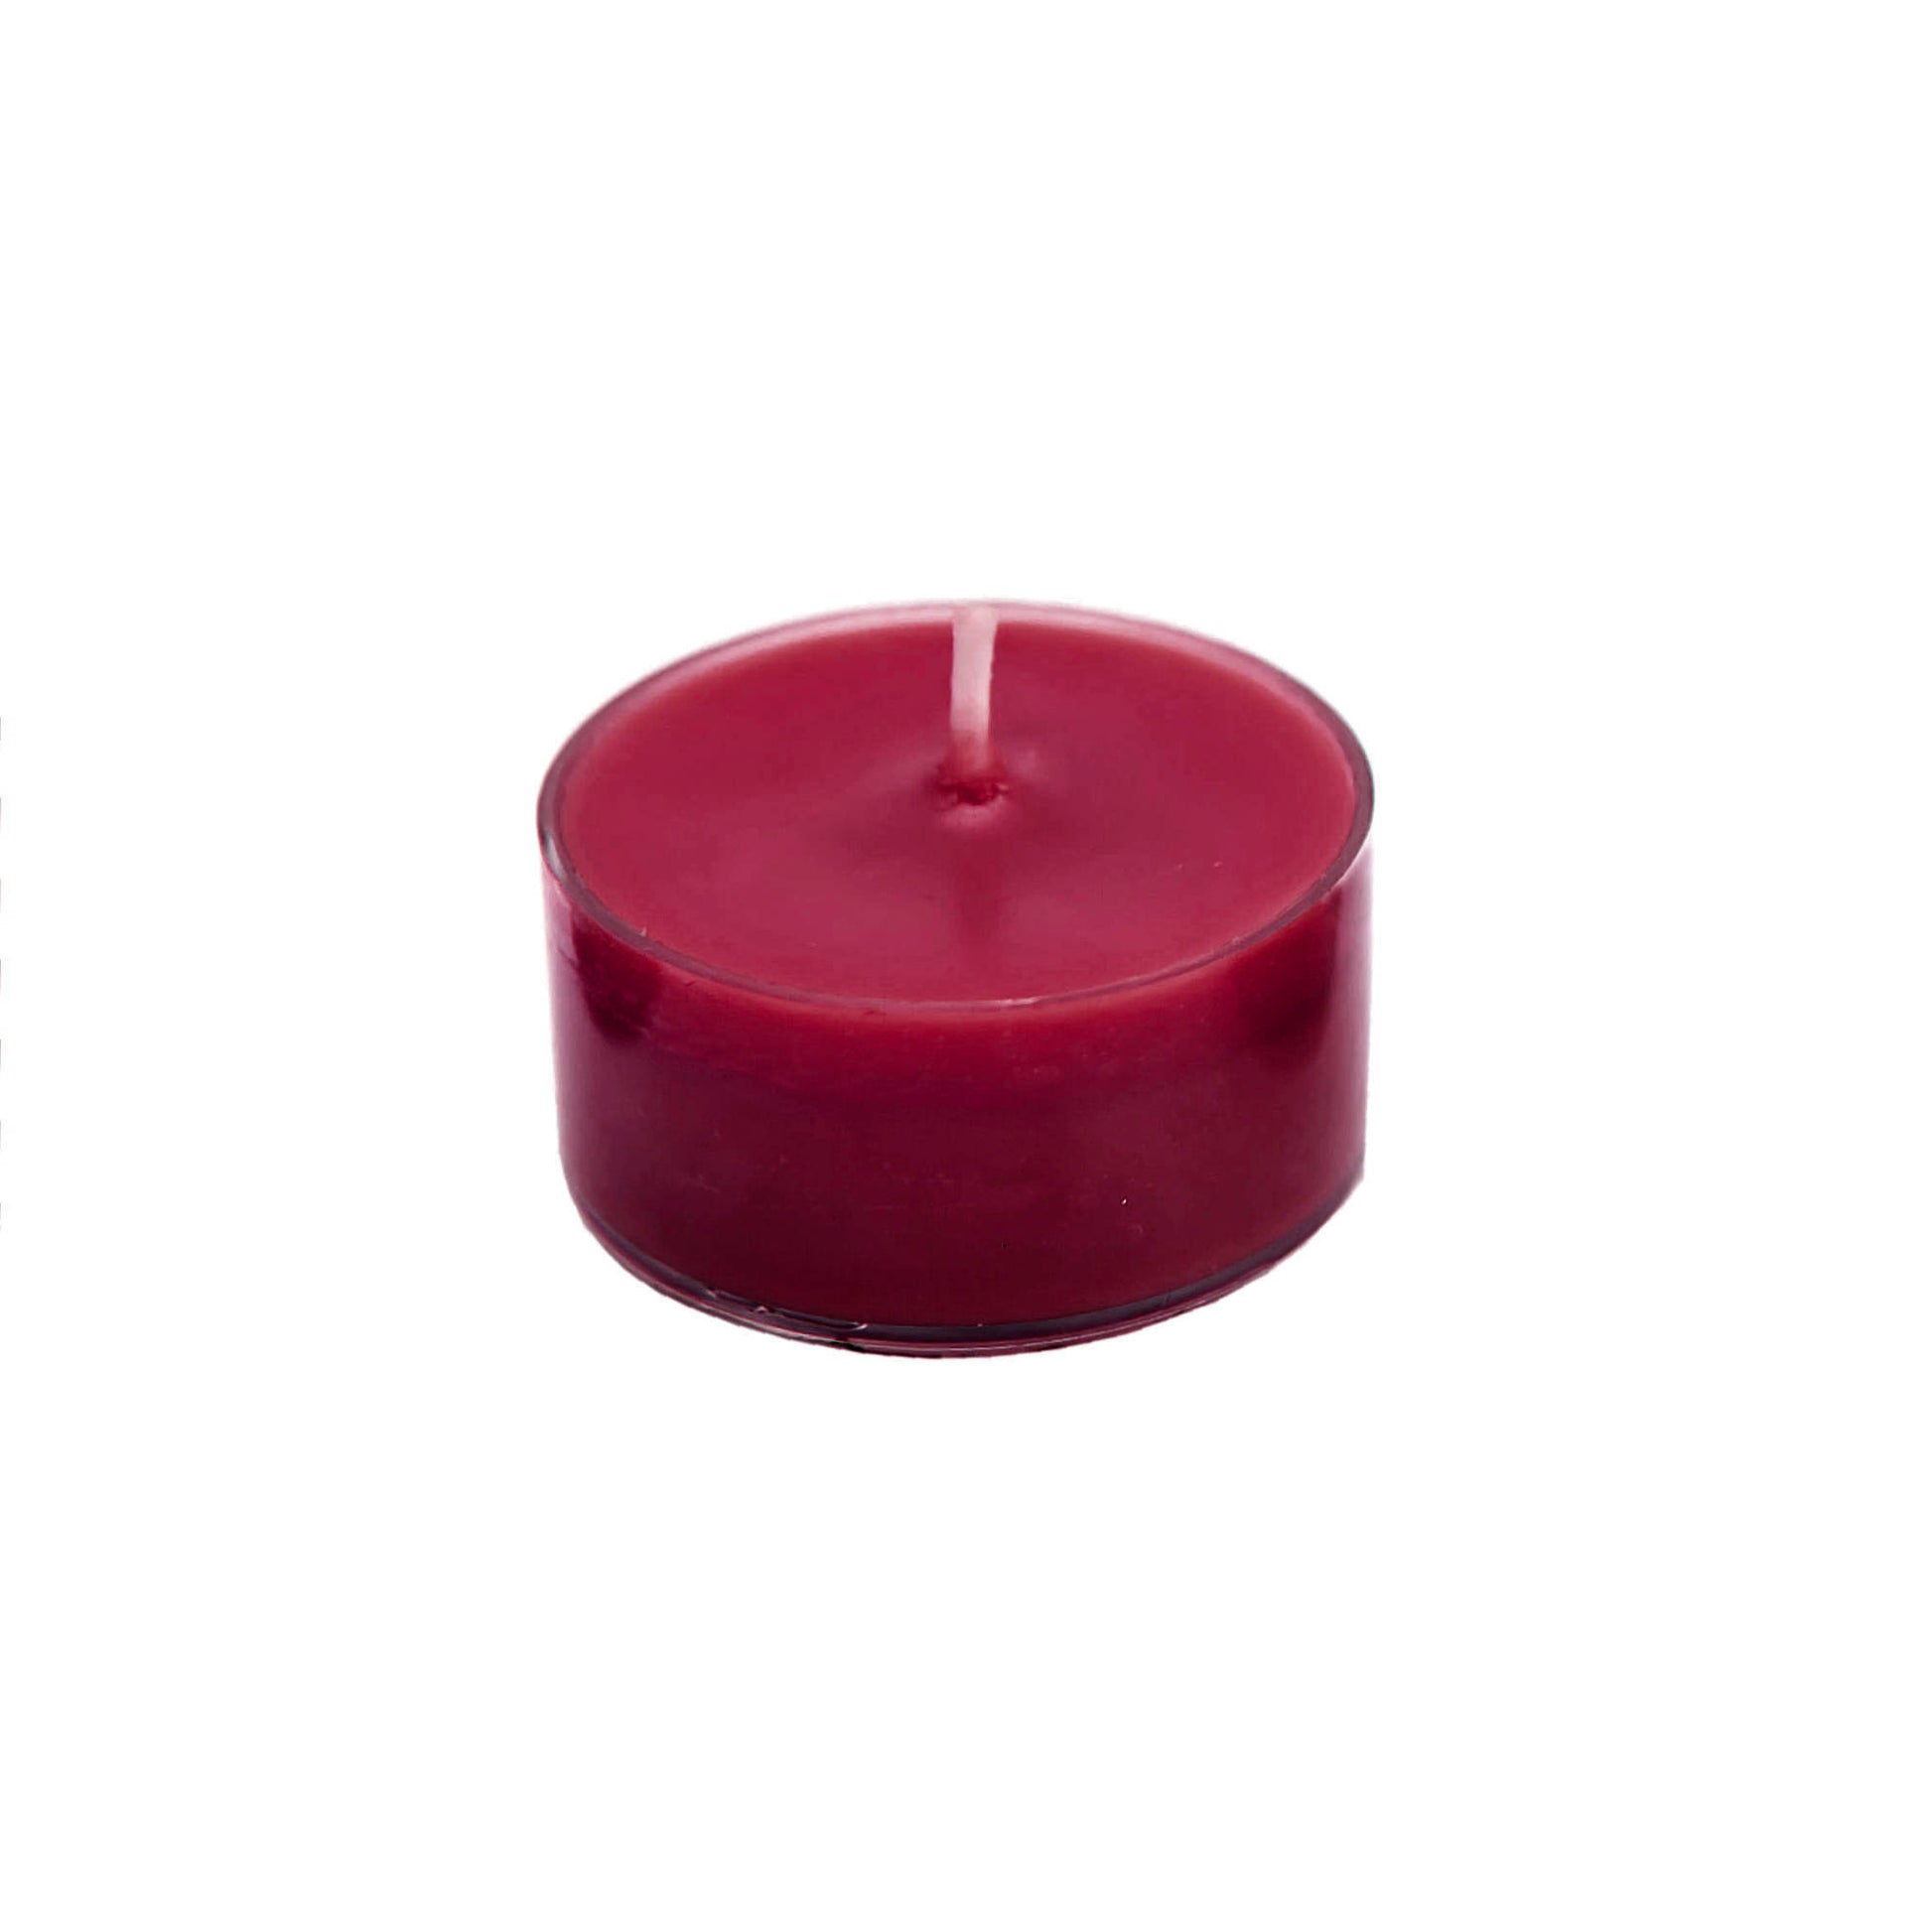 Pomegranate Tealights Scented Candles